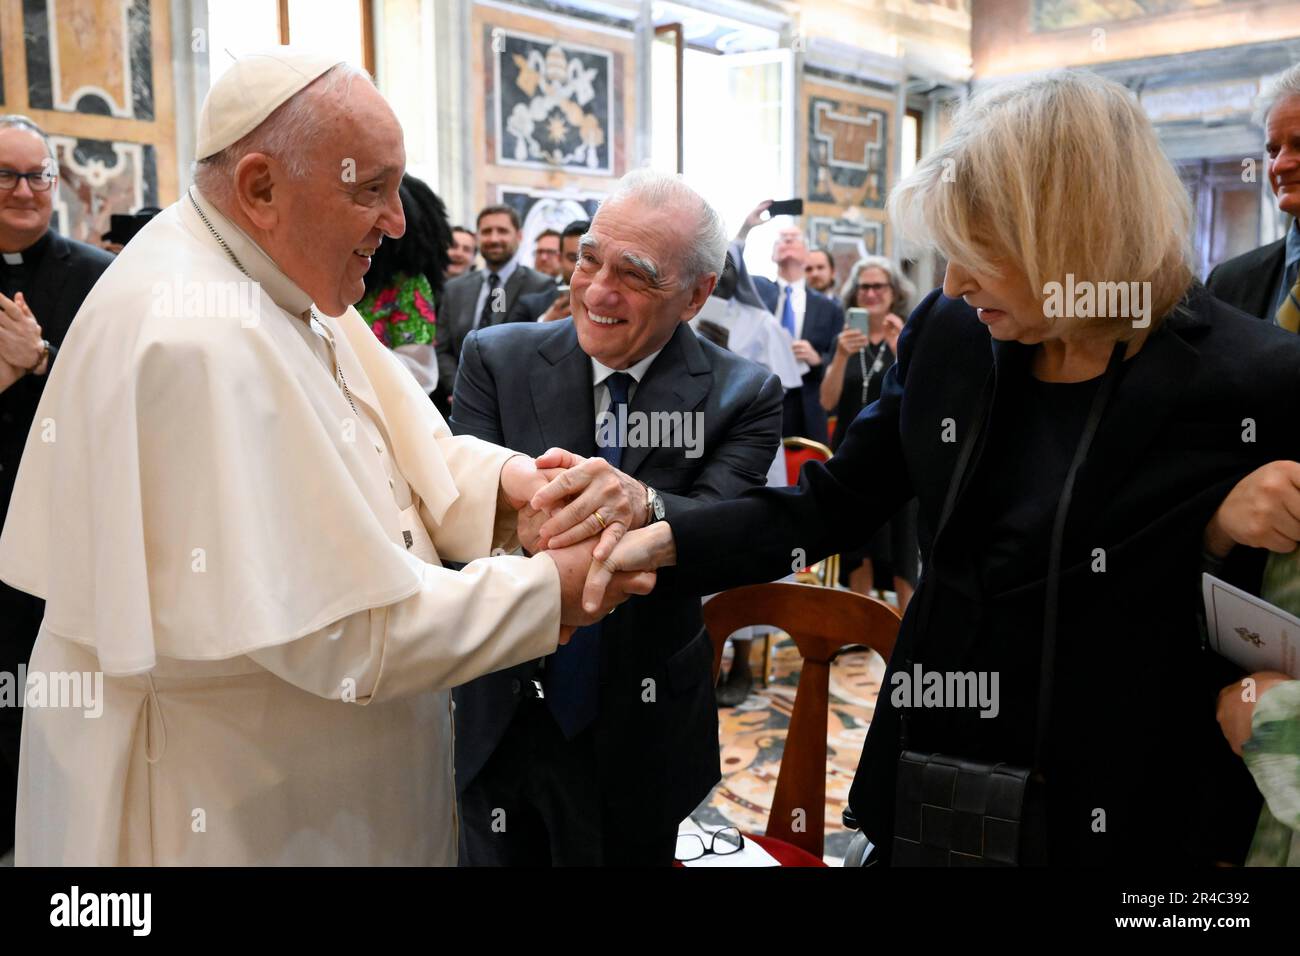 Vatican, Vatican. 27th May, 2023. Italy, Rome, Vatican, 2023/5/27. Pope Francis greets Martin Scorsese and wife Helen Morrisduirng in audience with participants at conference sponsored by La Civiltà Cattolica and Georgetown University at Vatican Photograph by Vatican Media /Catholic Press Photo . RESTRICTED TO EDITORIAL USE - NO MARKETING - NO ADVERTISING CAMPAIGNS. Credit: Independent Photo Agency/Alamy Live News Stock Photo